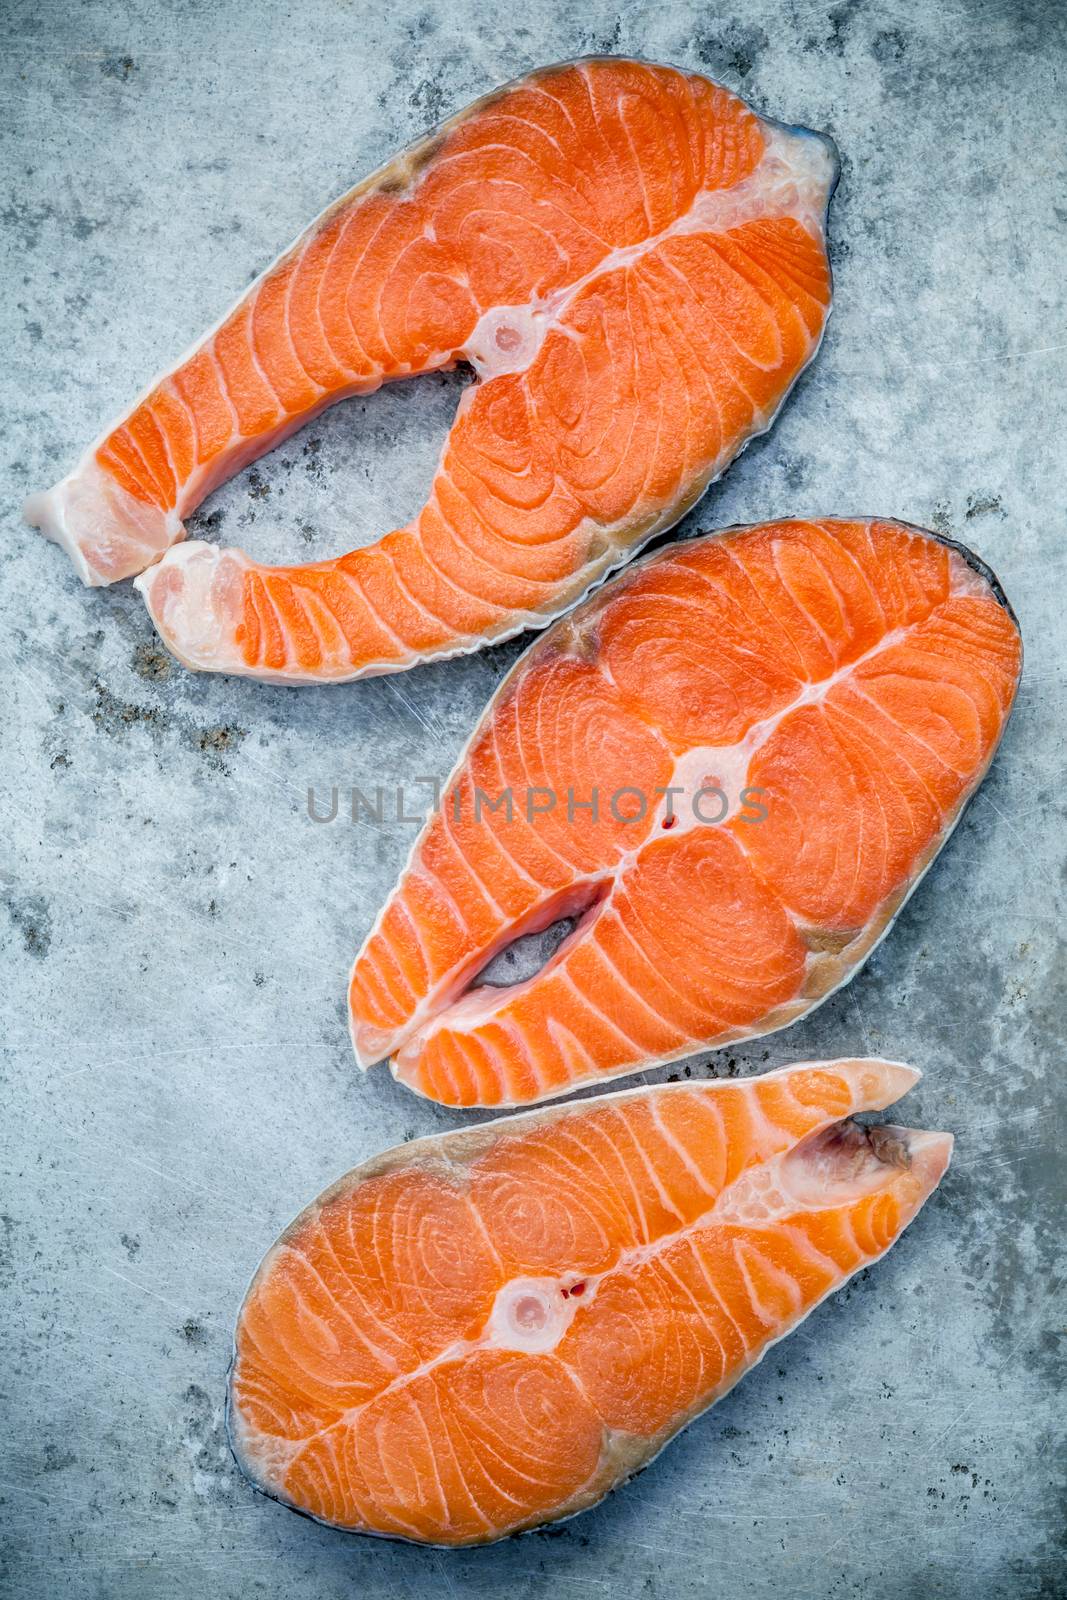 Fresh salmon fillet sliced flat lay on shabby metal background. Fresh salmon fillet sliced tempts buyers at fresh seafood stall.